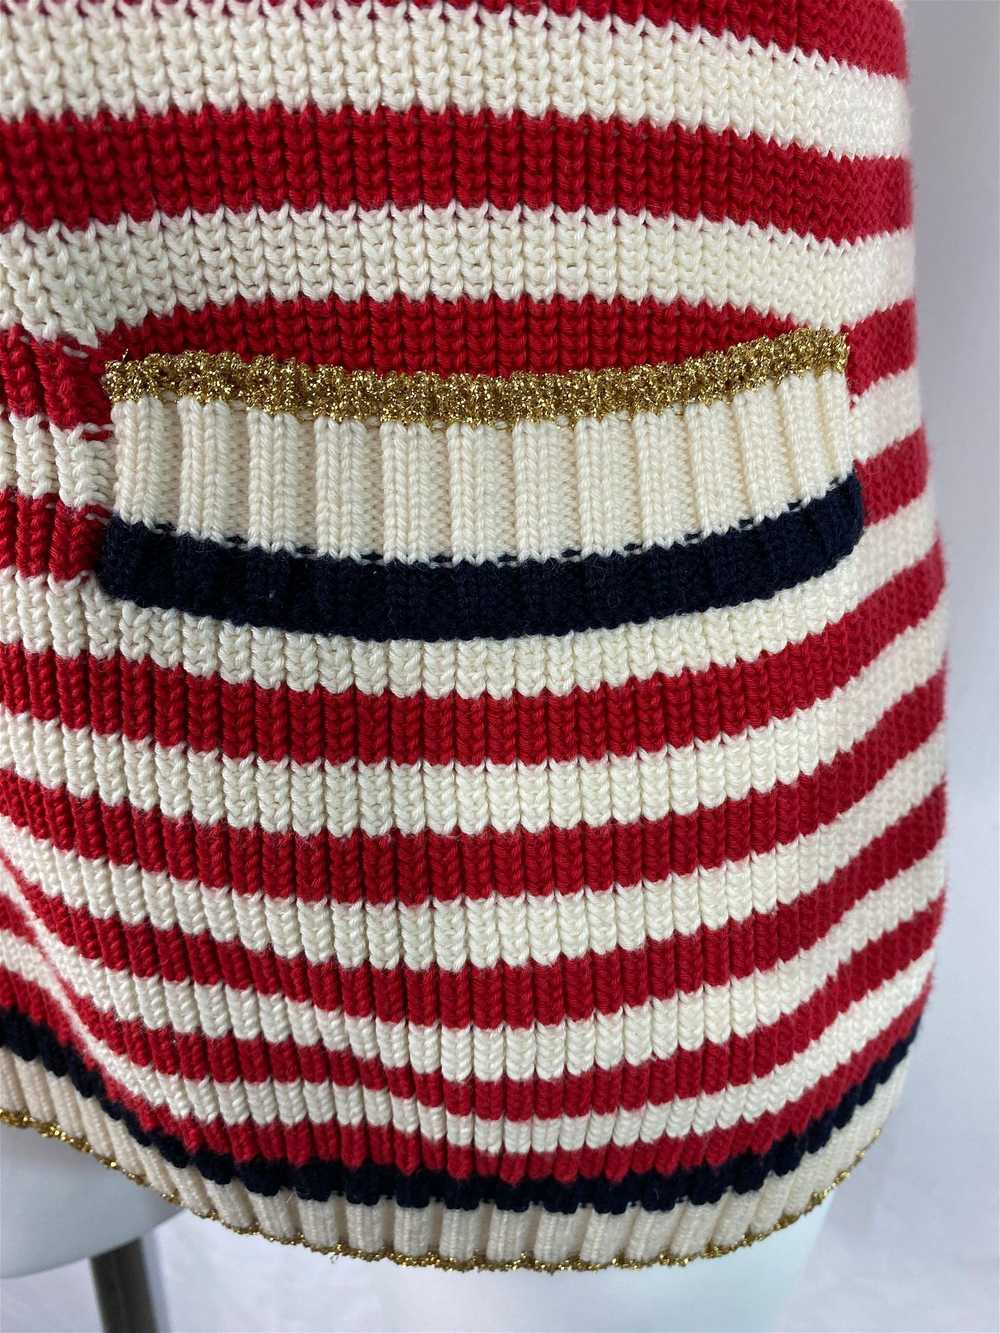 Gucci Red and White Wool Knit Sweater Top - image 9